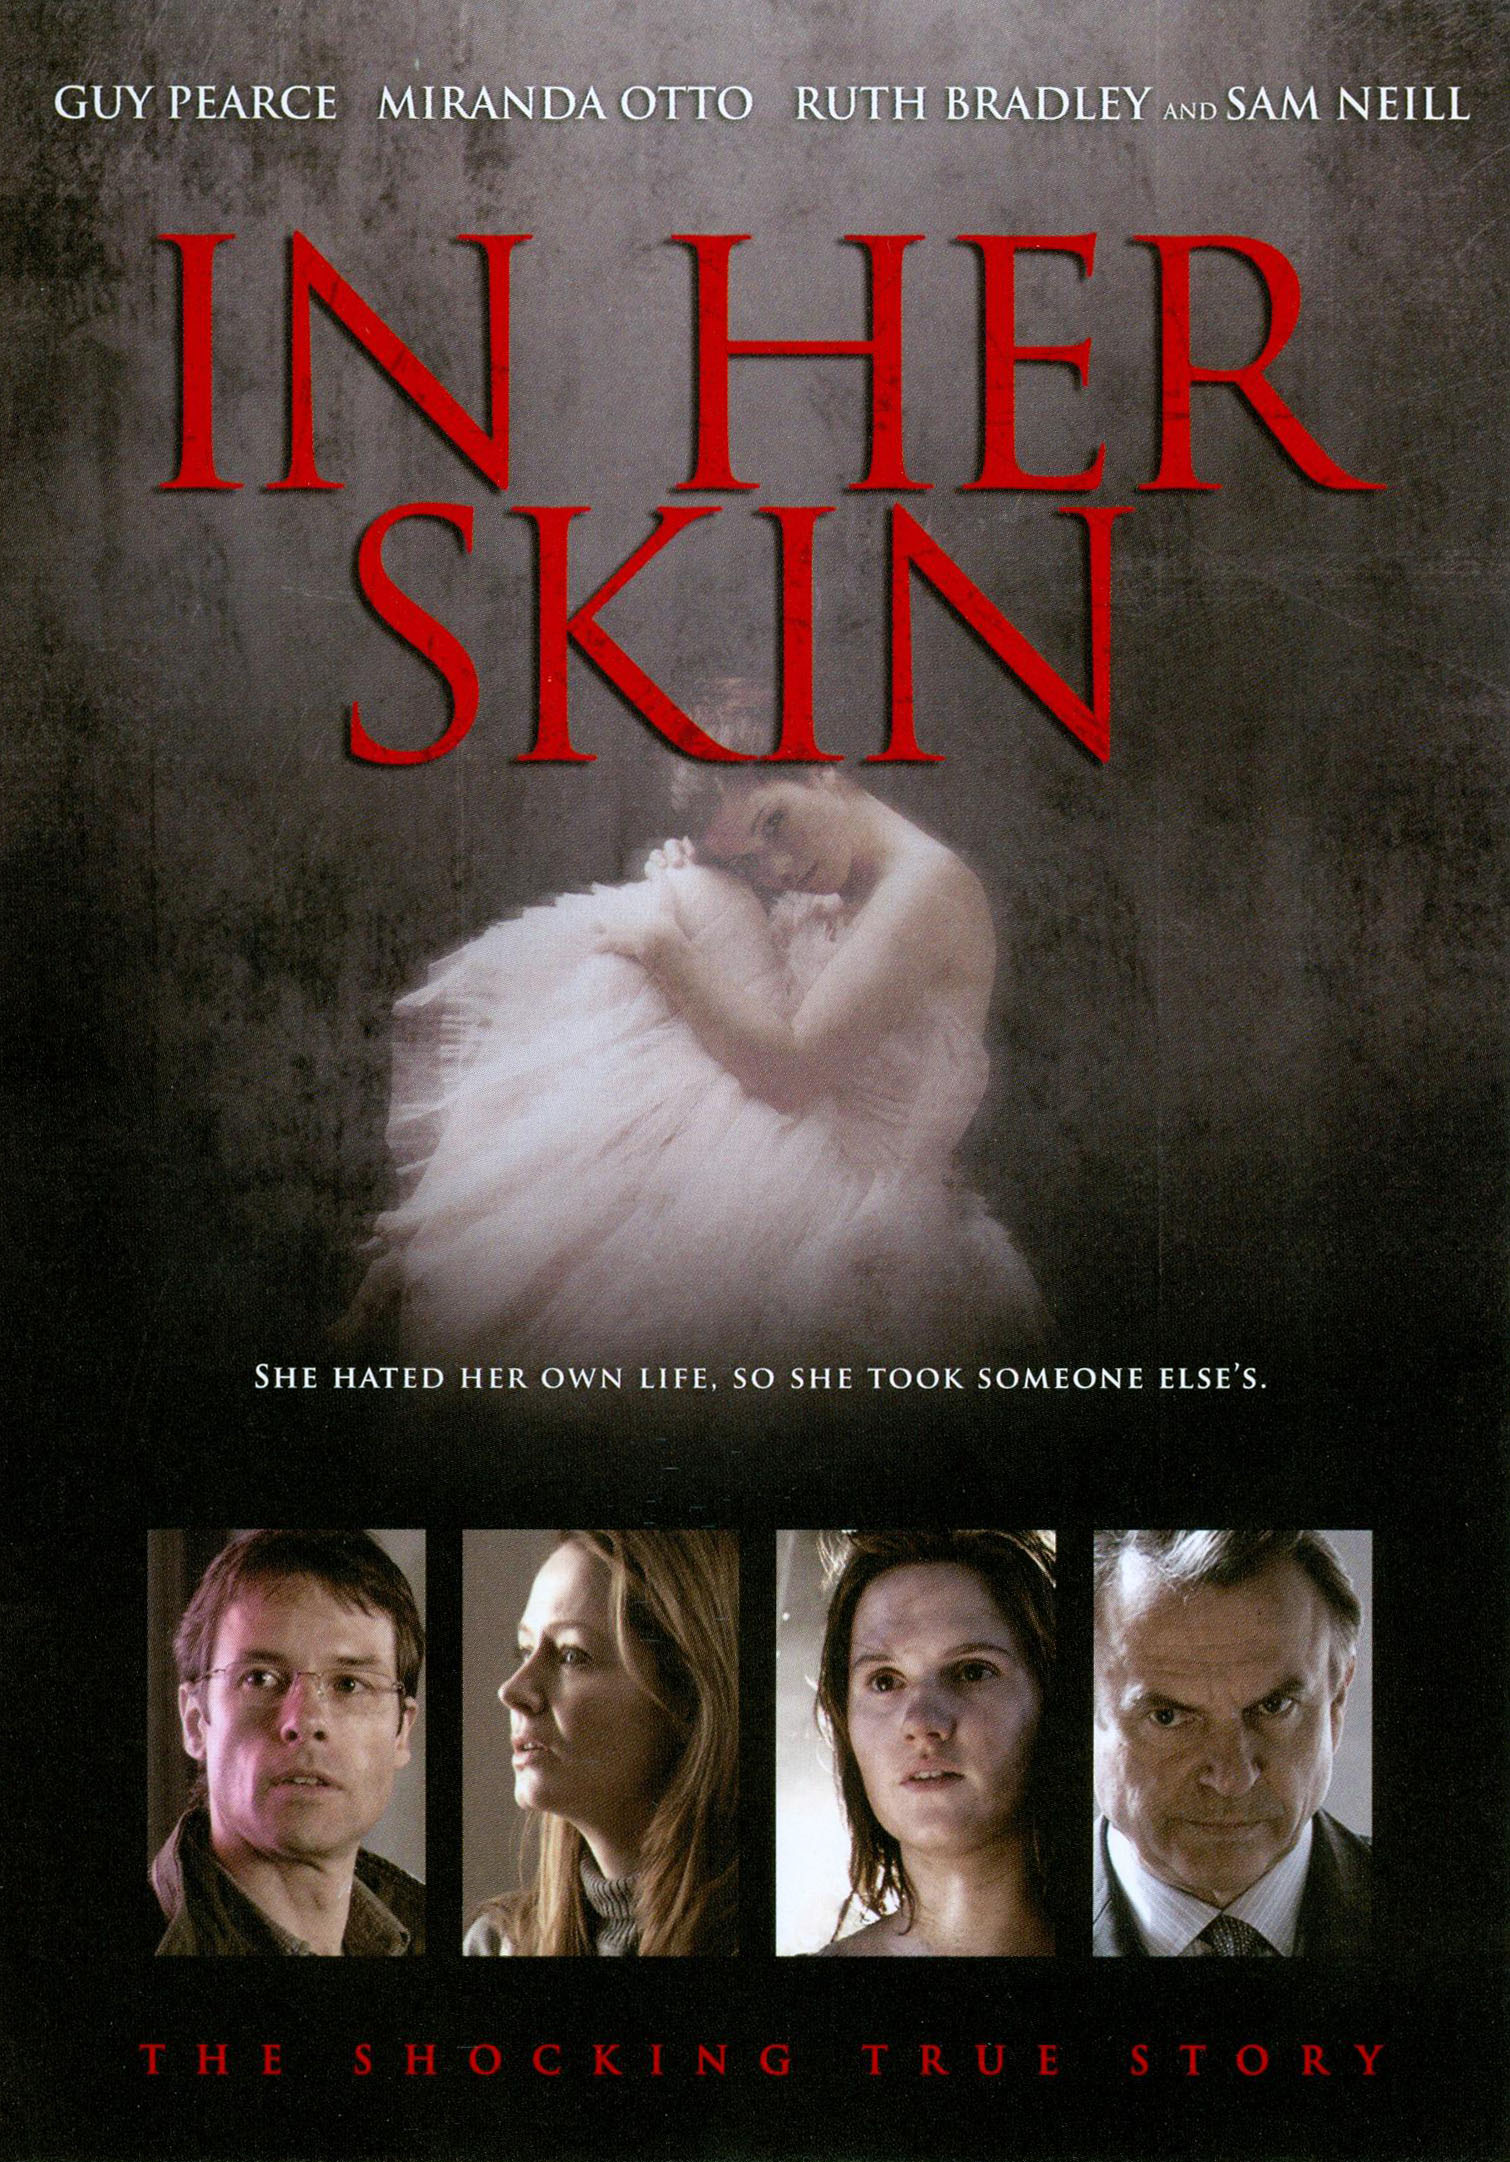 under the skin dvd cover